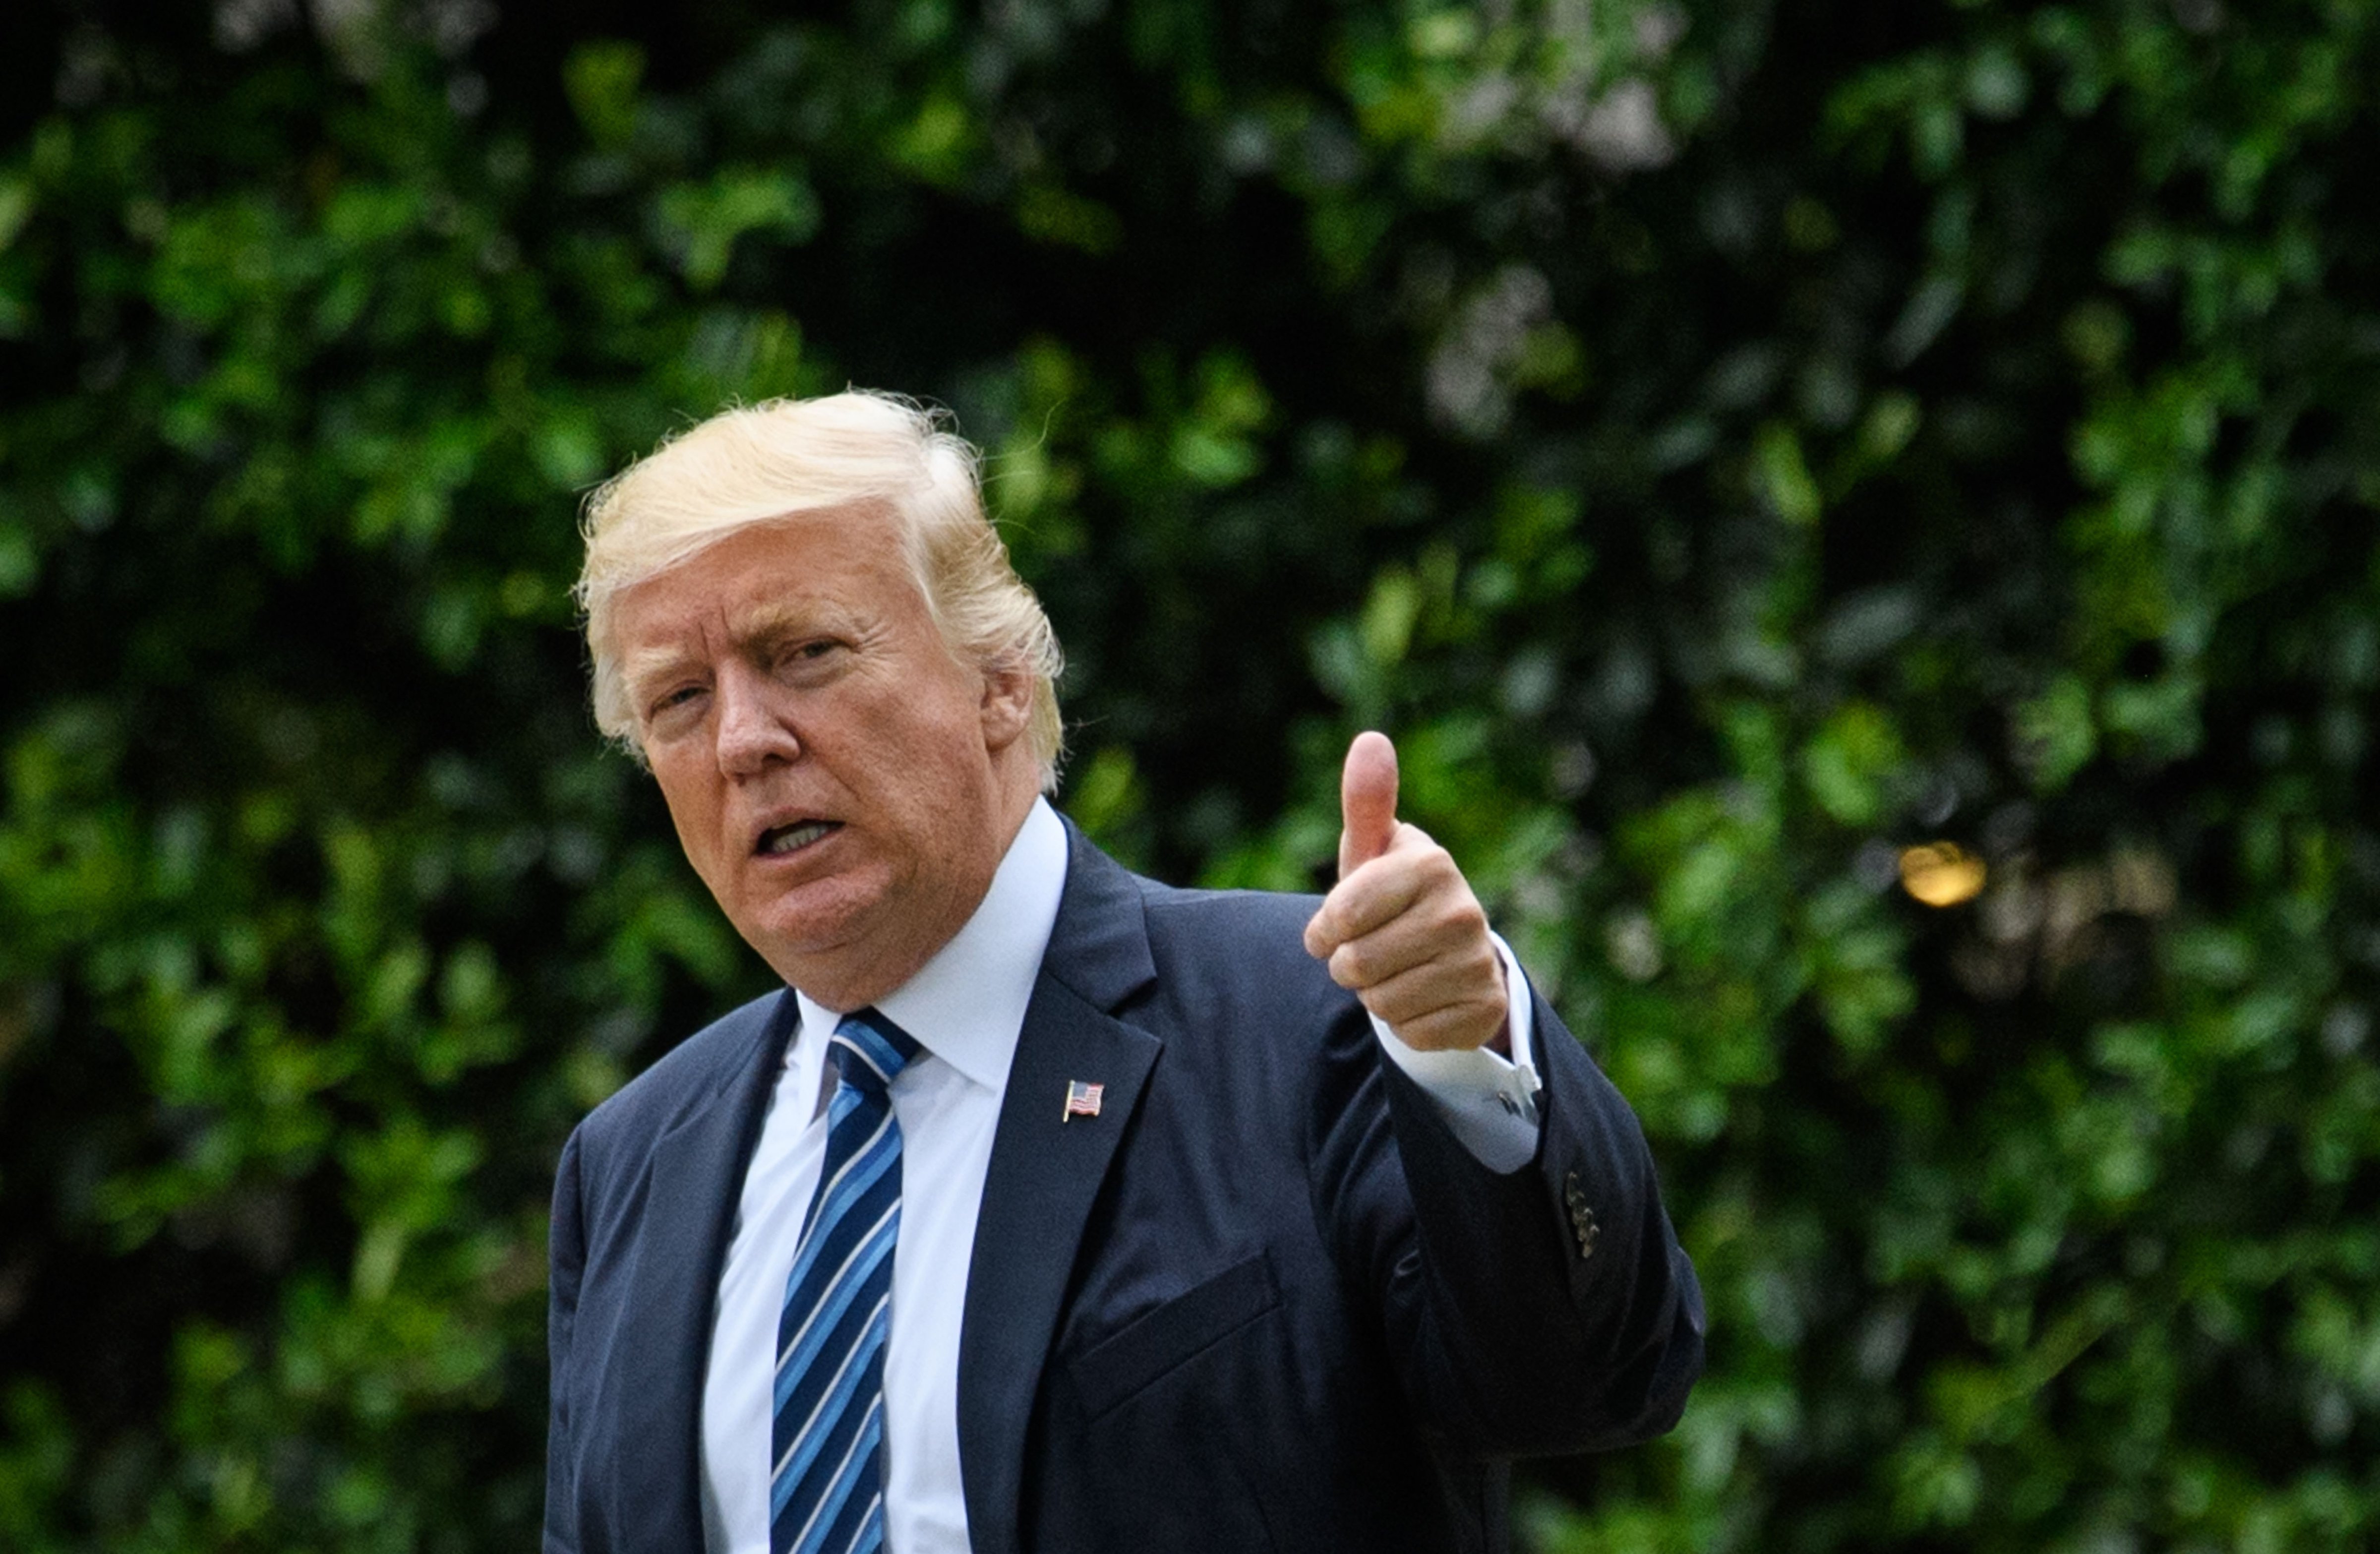 US President Donald Trump gives the thumbs-up as he makes his way to board Marine One on the South Lawn of the White House in Washington, DC on May 4, 2017. Trump was headed to New York, NY. (MANDEL NGAN—AFP/Getty Images)